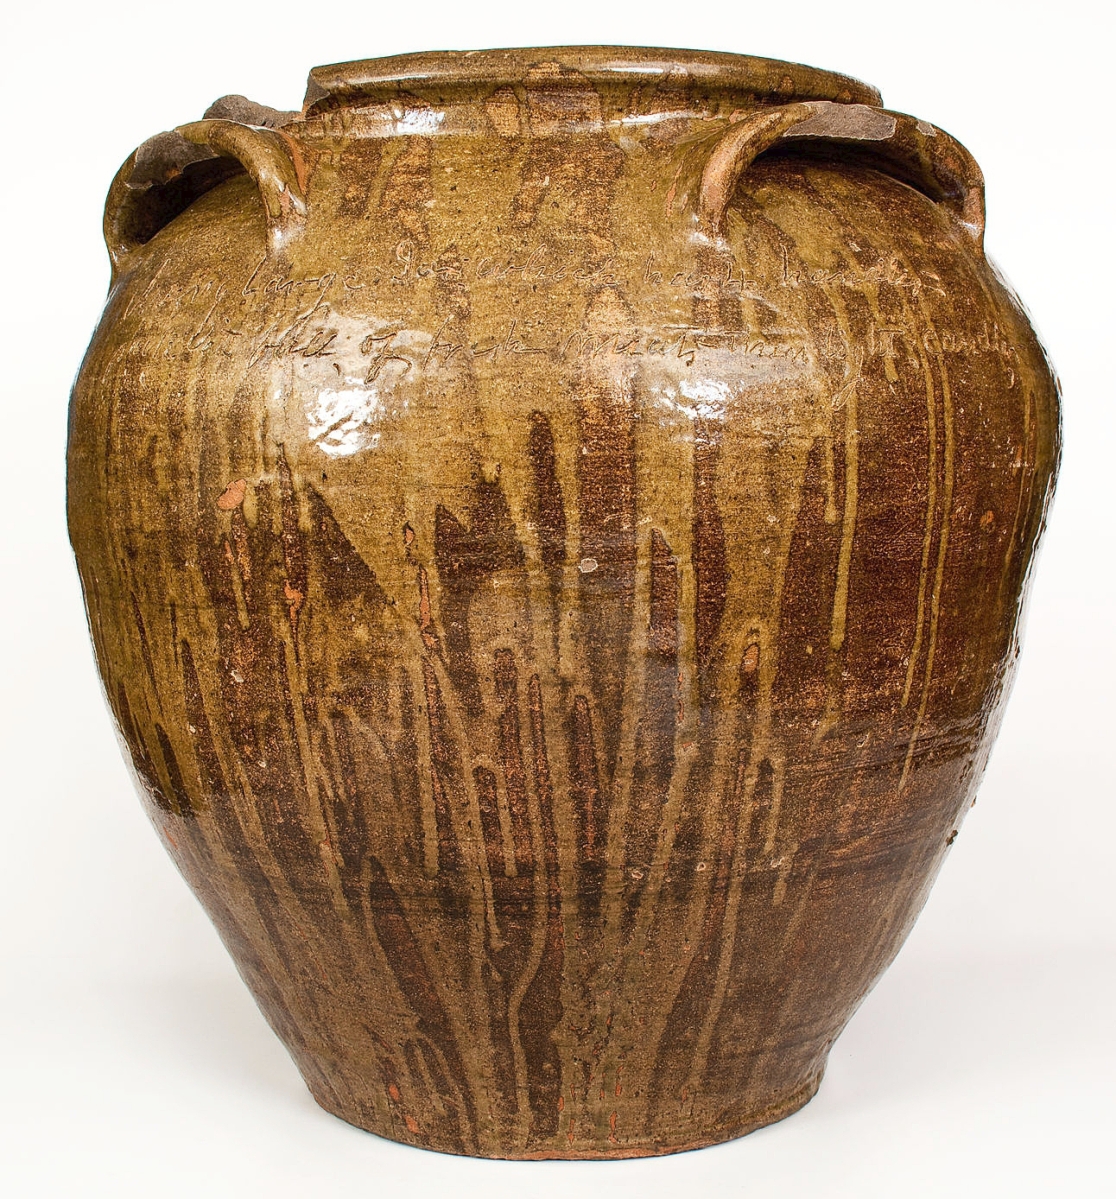 As of today, the highest grossing work of American pottery is a 25-gallon jar by enslaved African American potter Dave Drake. The jar sold for $1,560,000 in Crocker Farm’s sale, besting an $800,000 record-holding result on a John Bartlam teapot in 2018. It features the poem “A very Large Jar which has 4 handles / pack it full of fresh meats- then light candles” and is signed and dated April 12, 1858. The work was discovered by folk art scholar John Burrison, who consigned it. An as-yet unnamed institution purchased it.